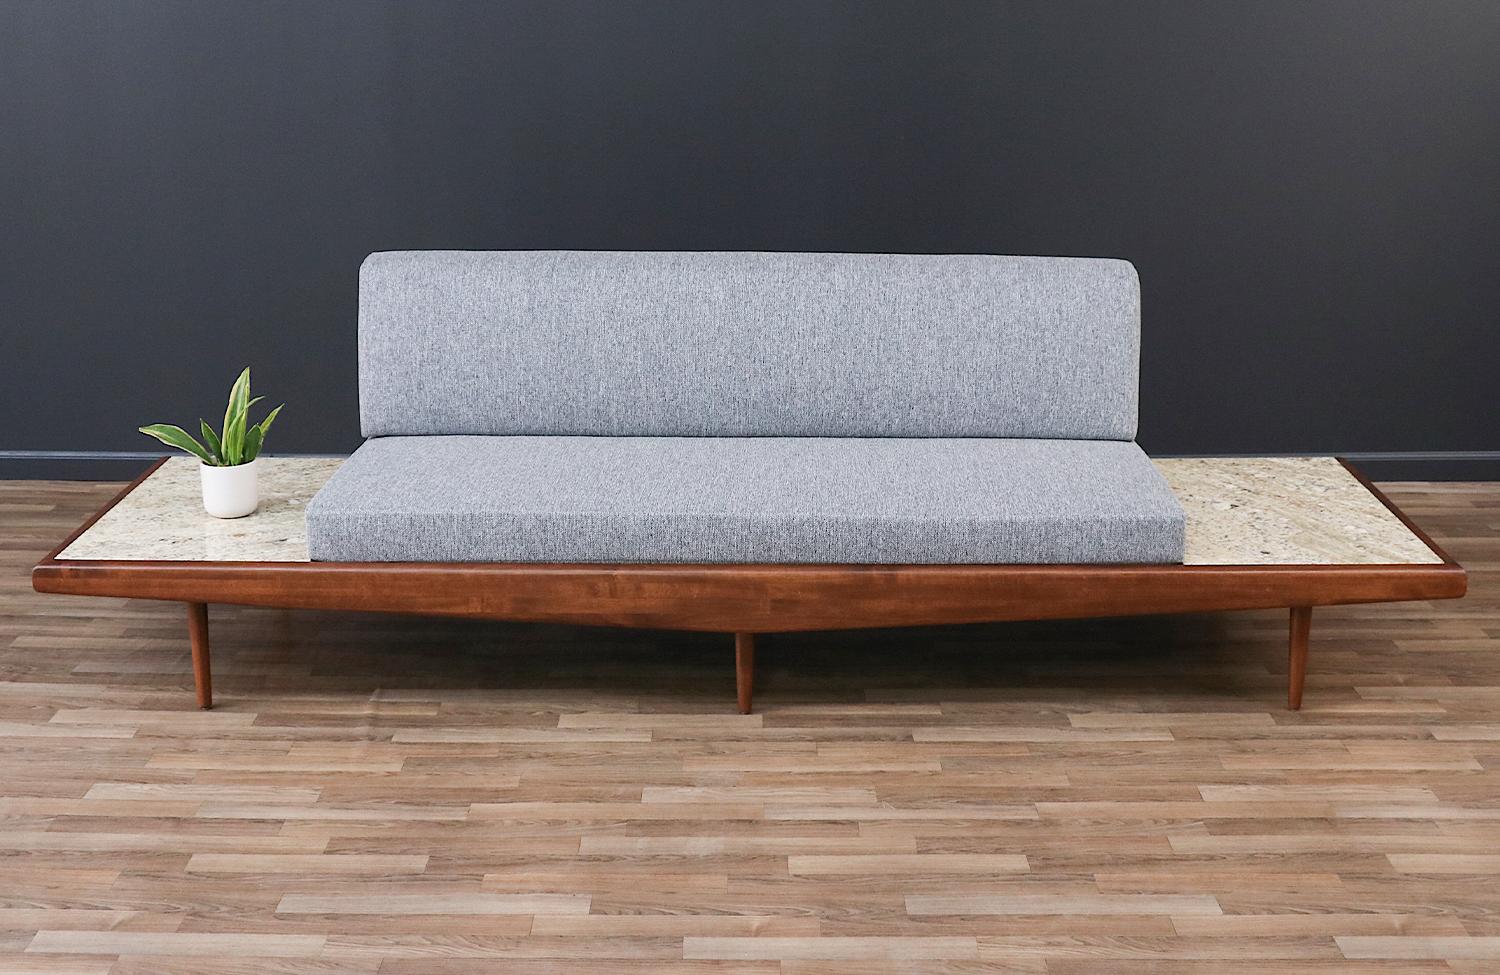 Mid-Century Modern Adrian Pearsall Sofa with Travertine Side Tables for Craft Associates For Sale